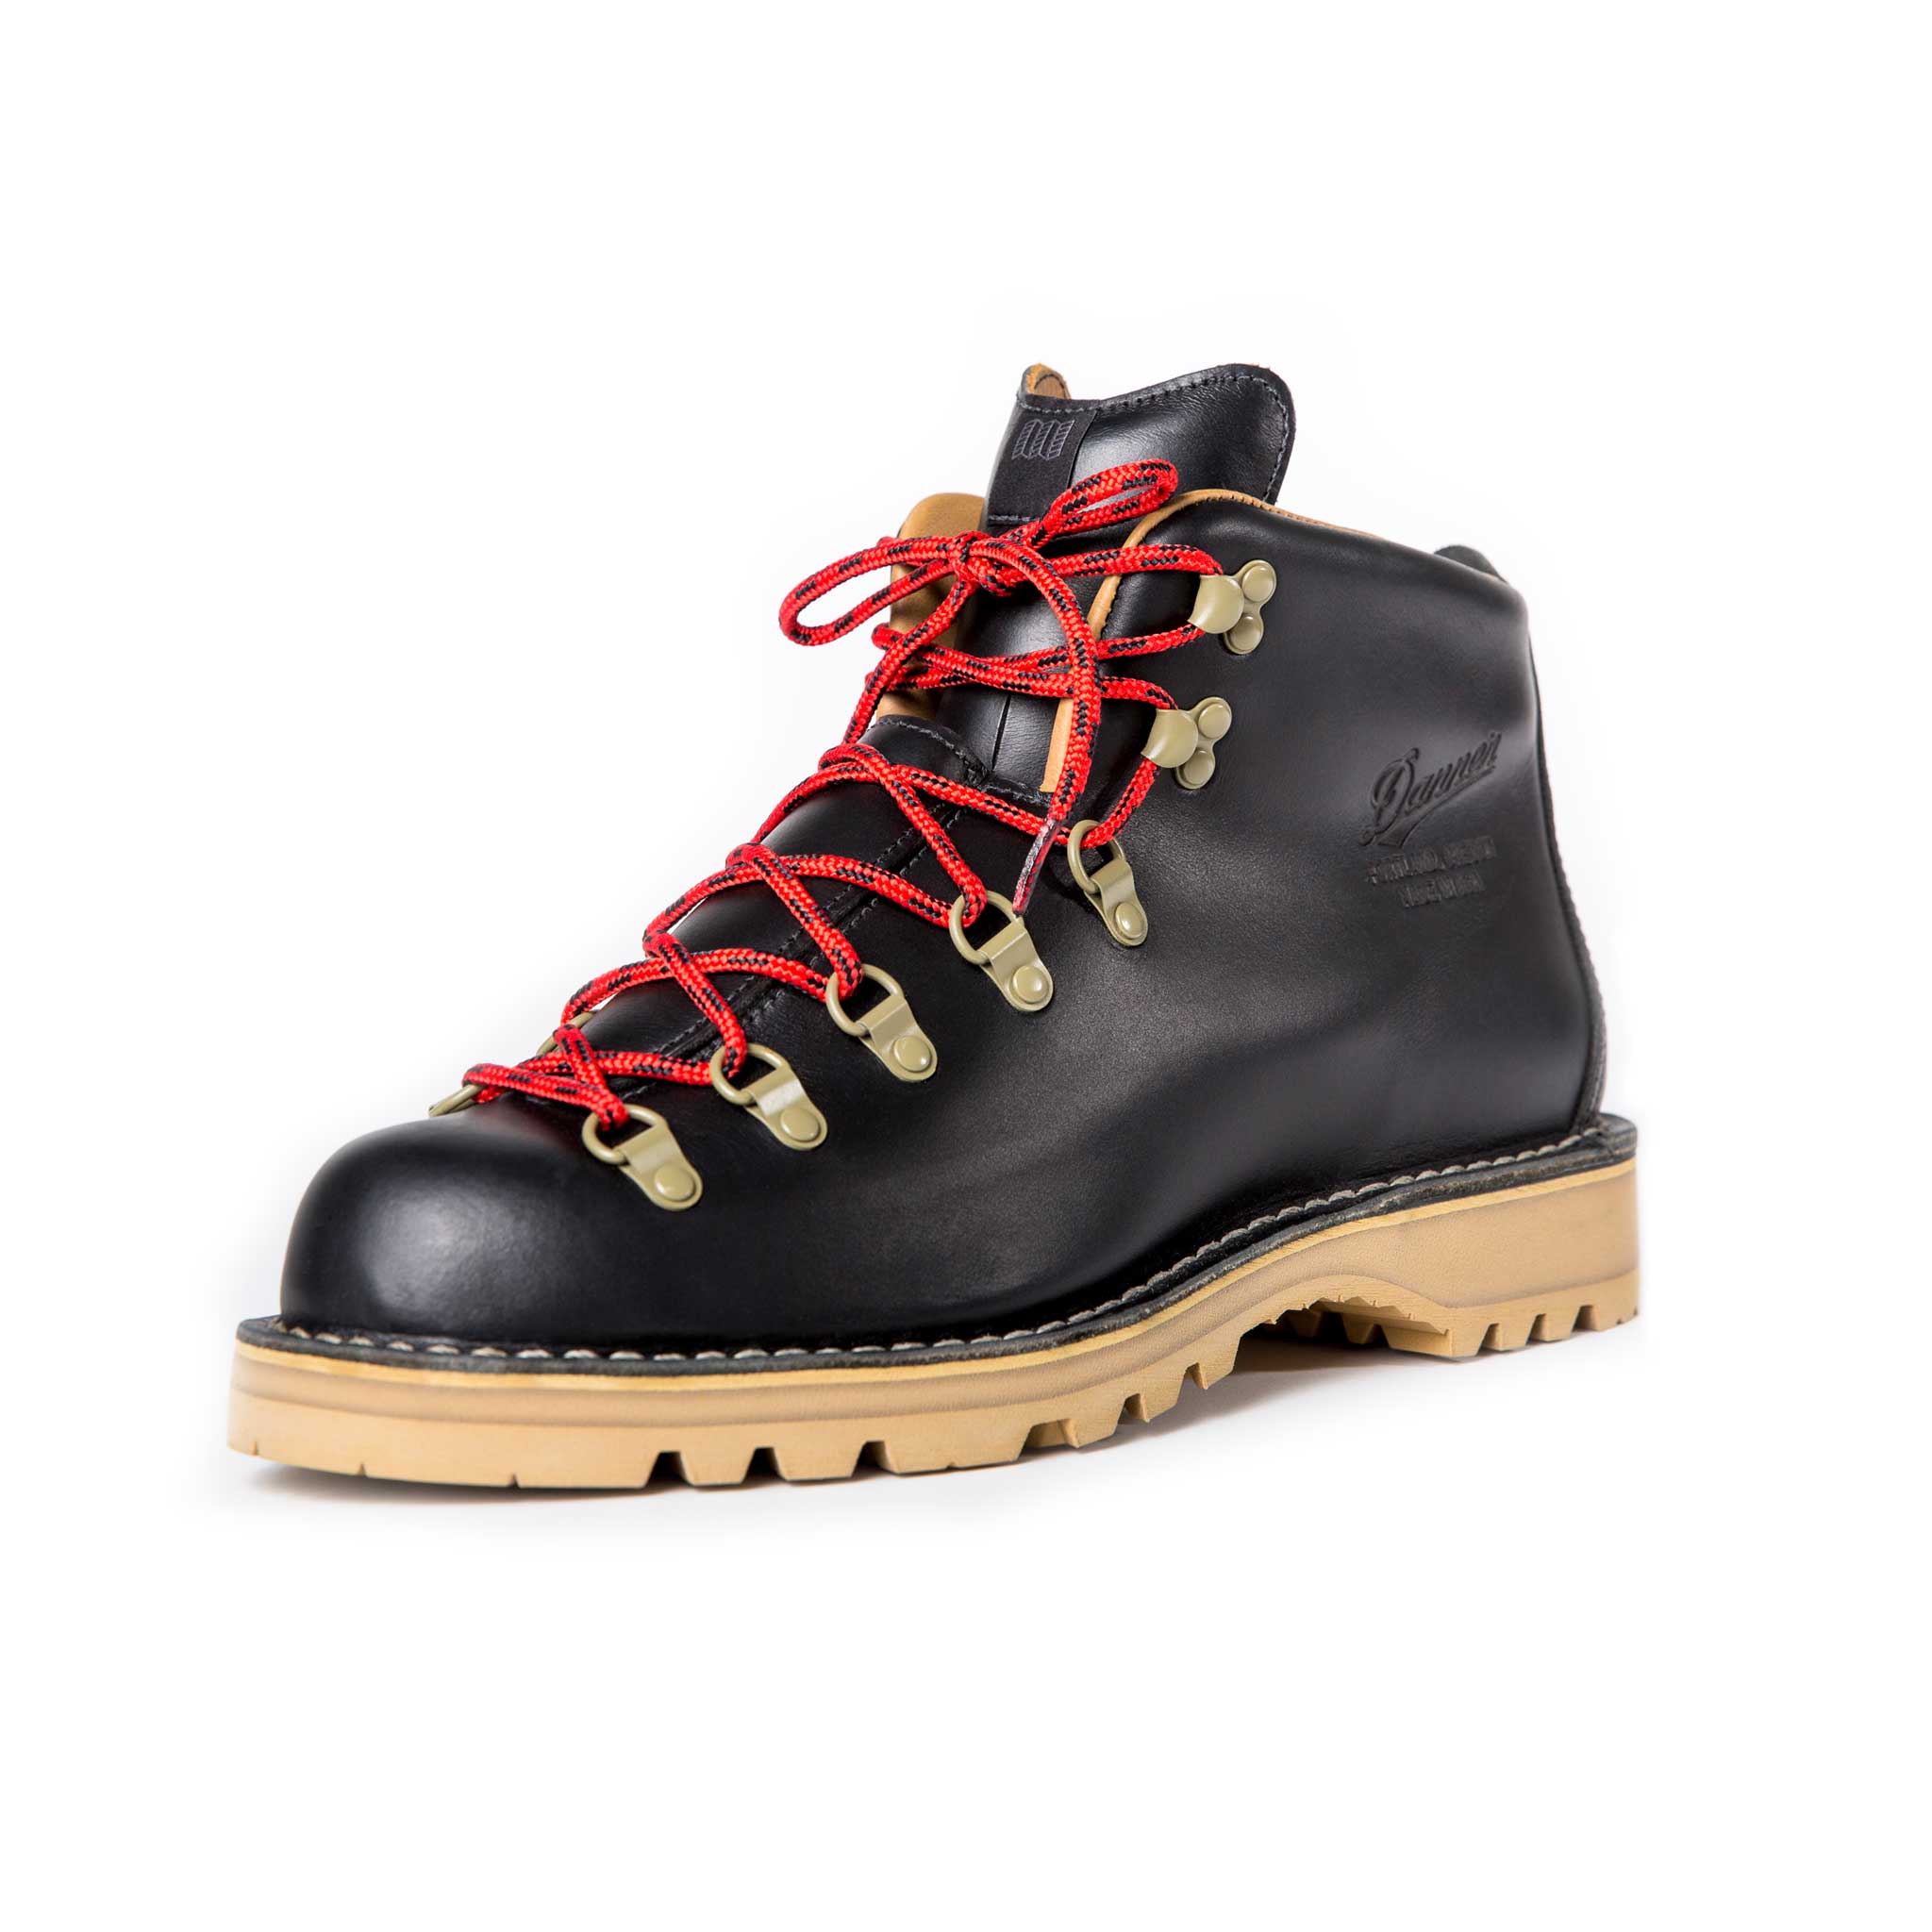 boots similar to danner mountain light